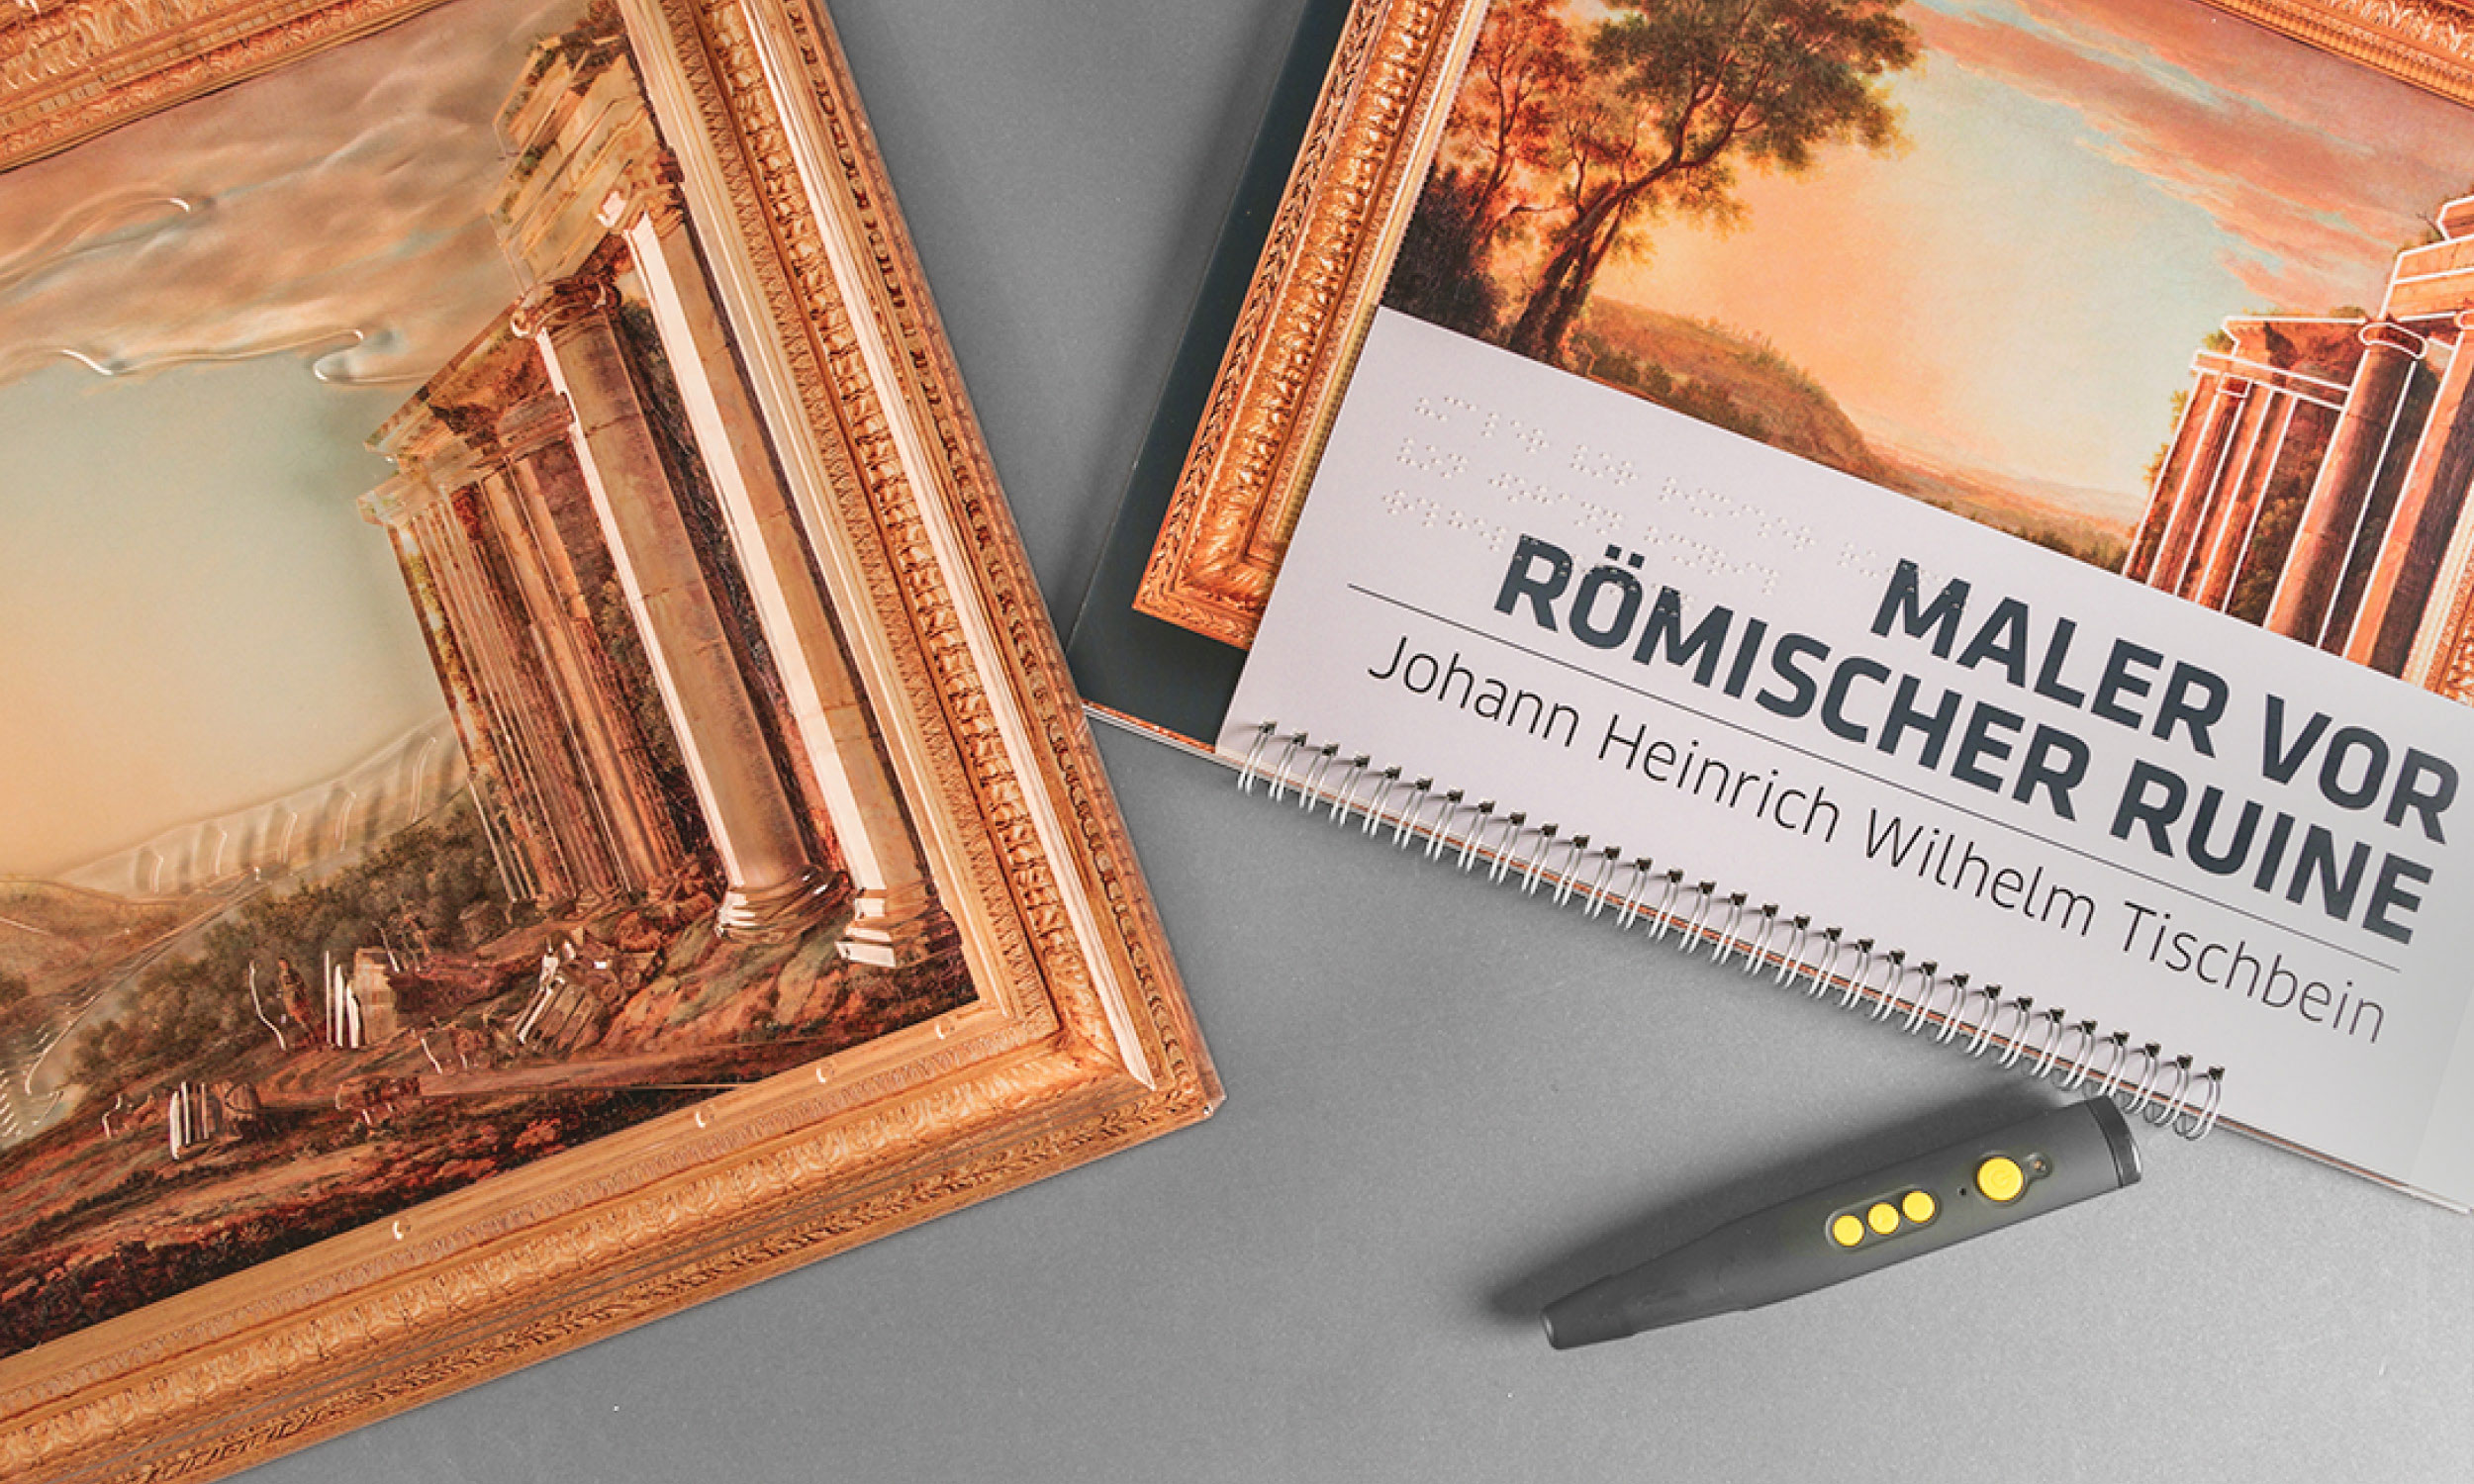 Photo of the touch painting and the tactile accompanying booklet "Painter in front of a Roman ruin" with enclosed hearing pen on grey table surface